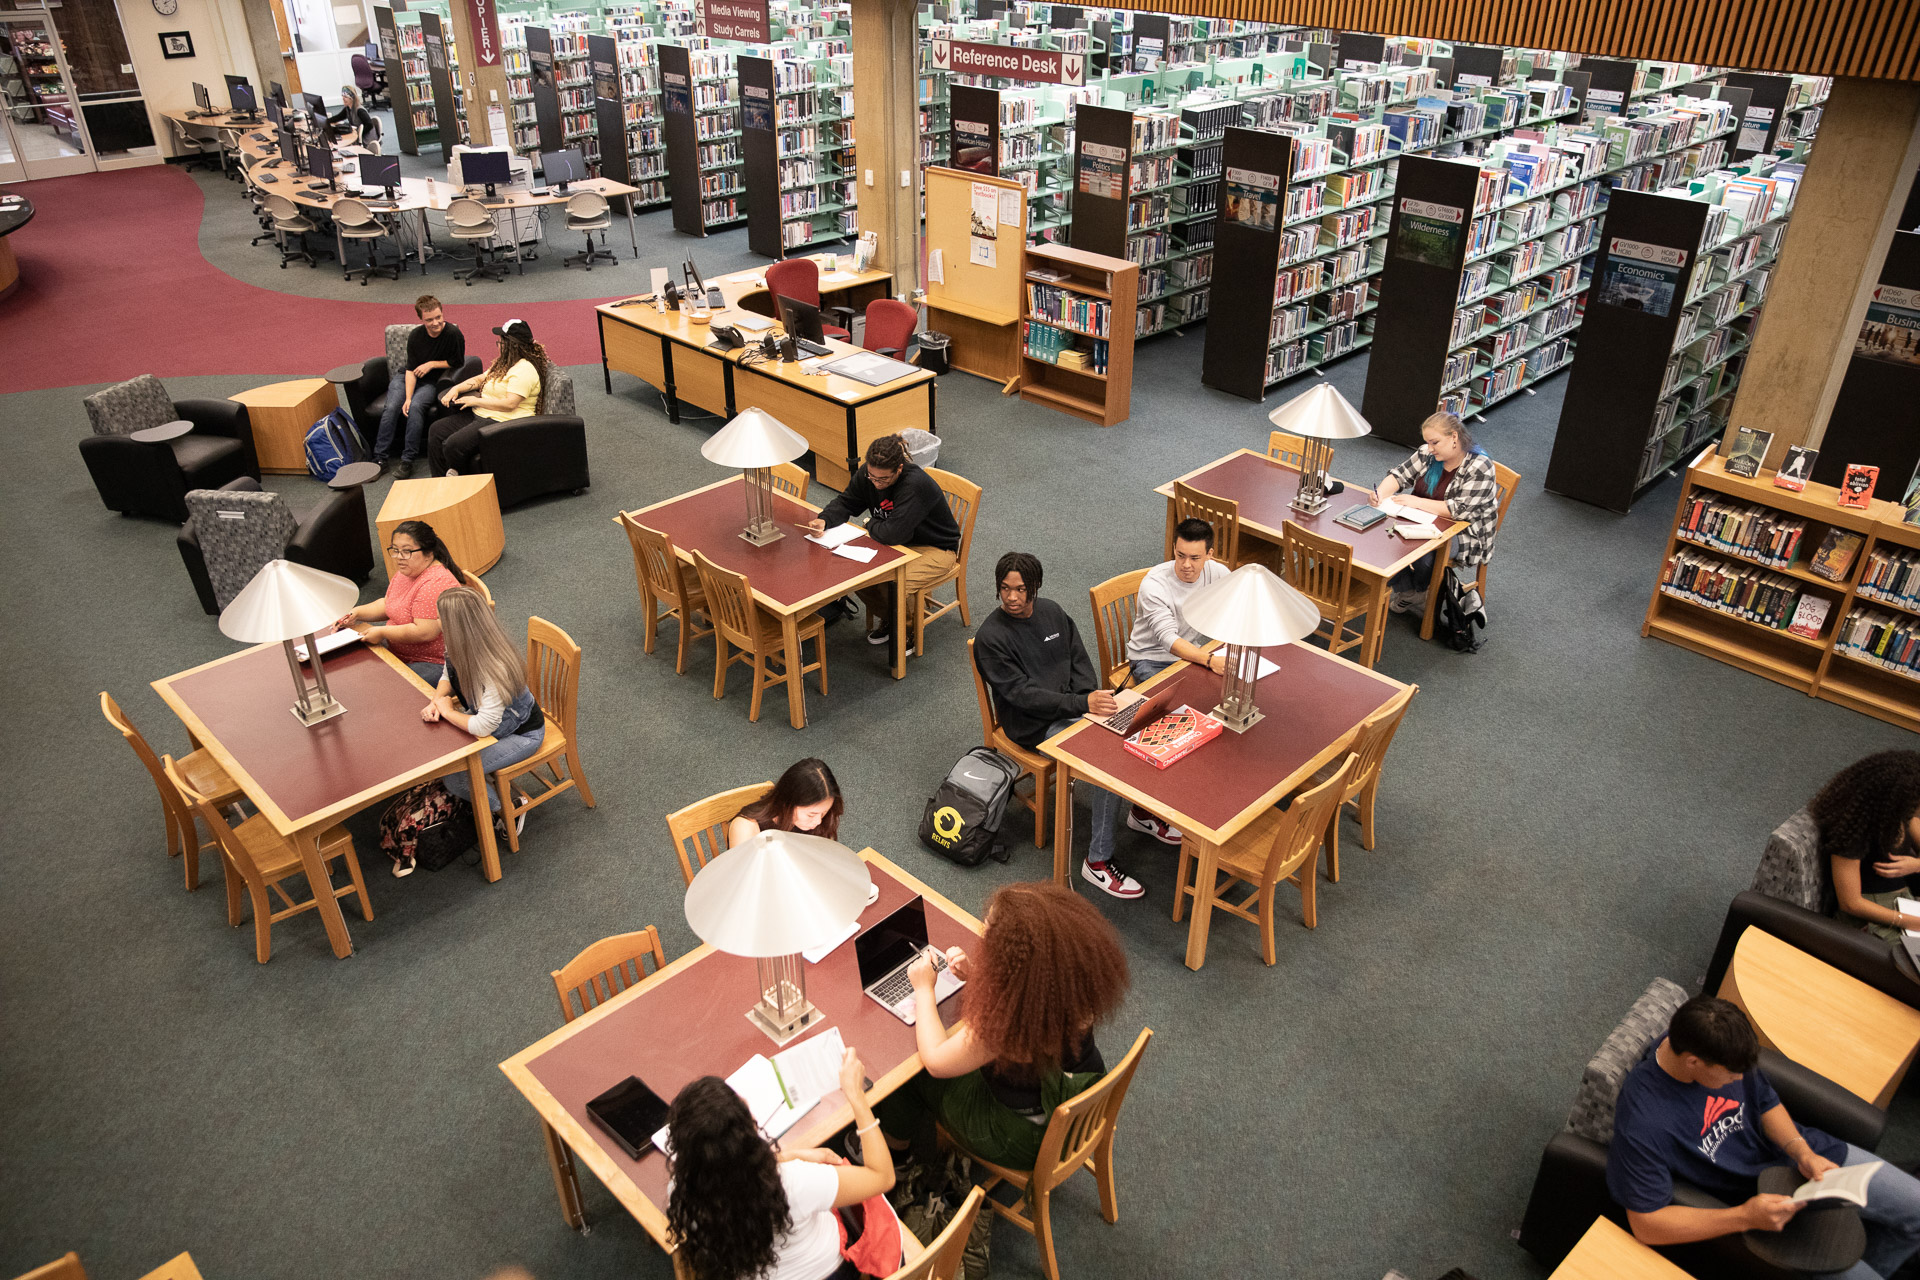 Students studying in the library at tables